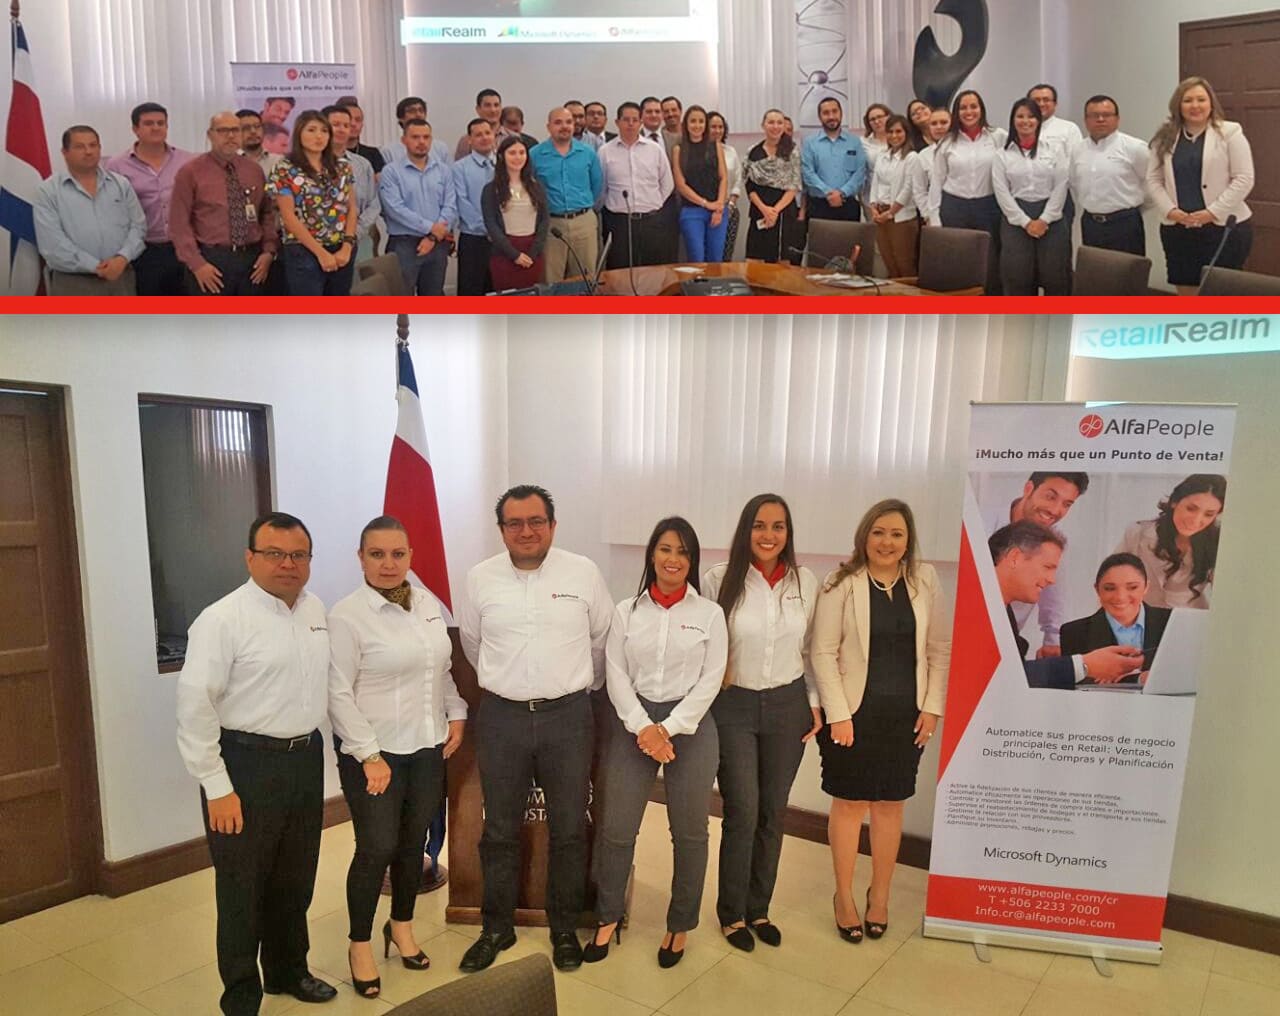 New retail trends presented to Costa Rican entrepreneurs